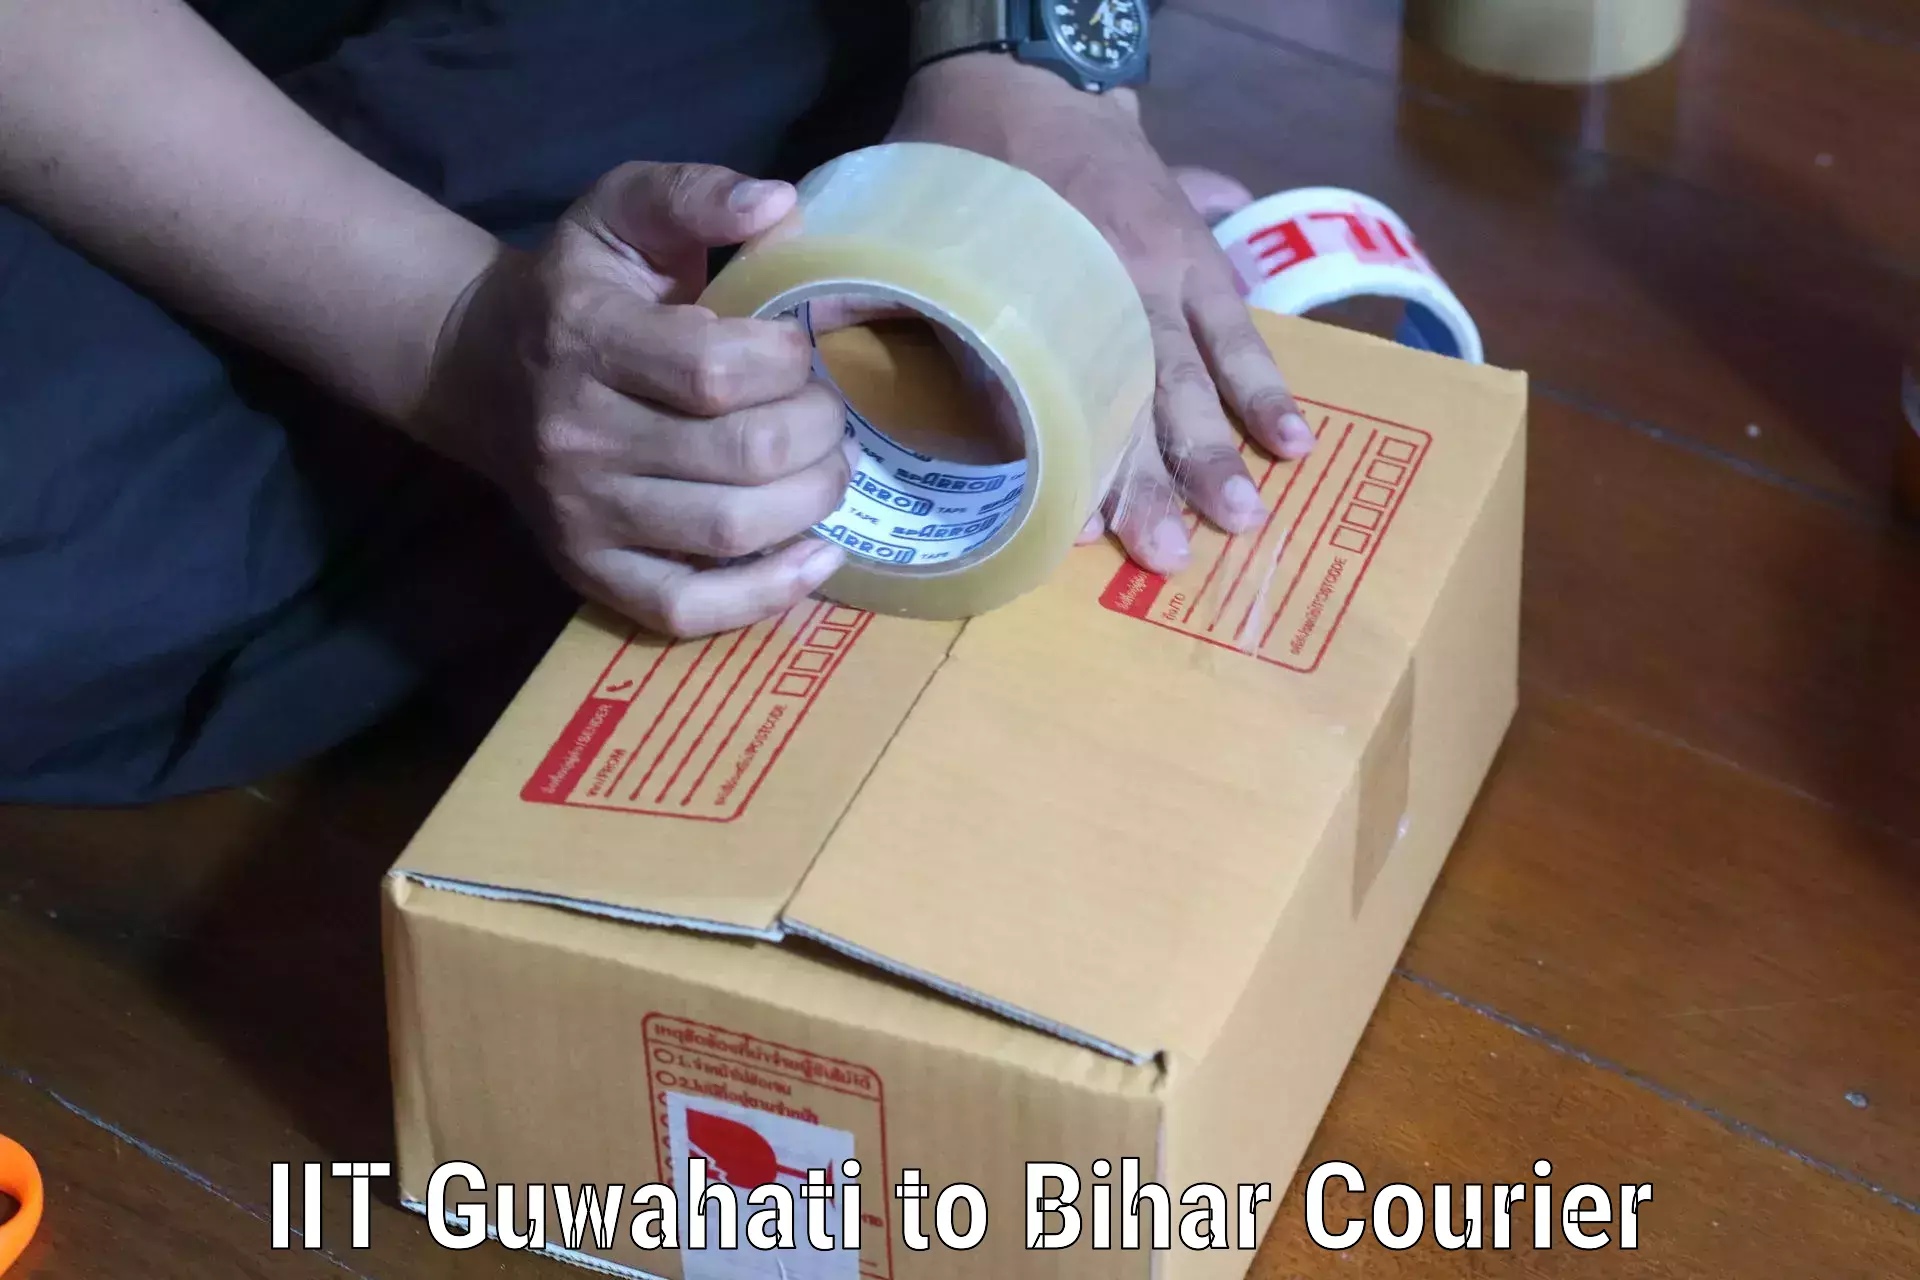 Reliable parcel services IIT Guwahati to Simrahi Bazar